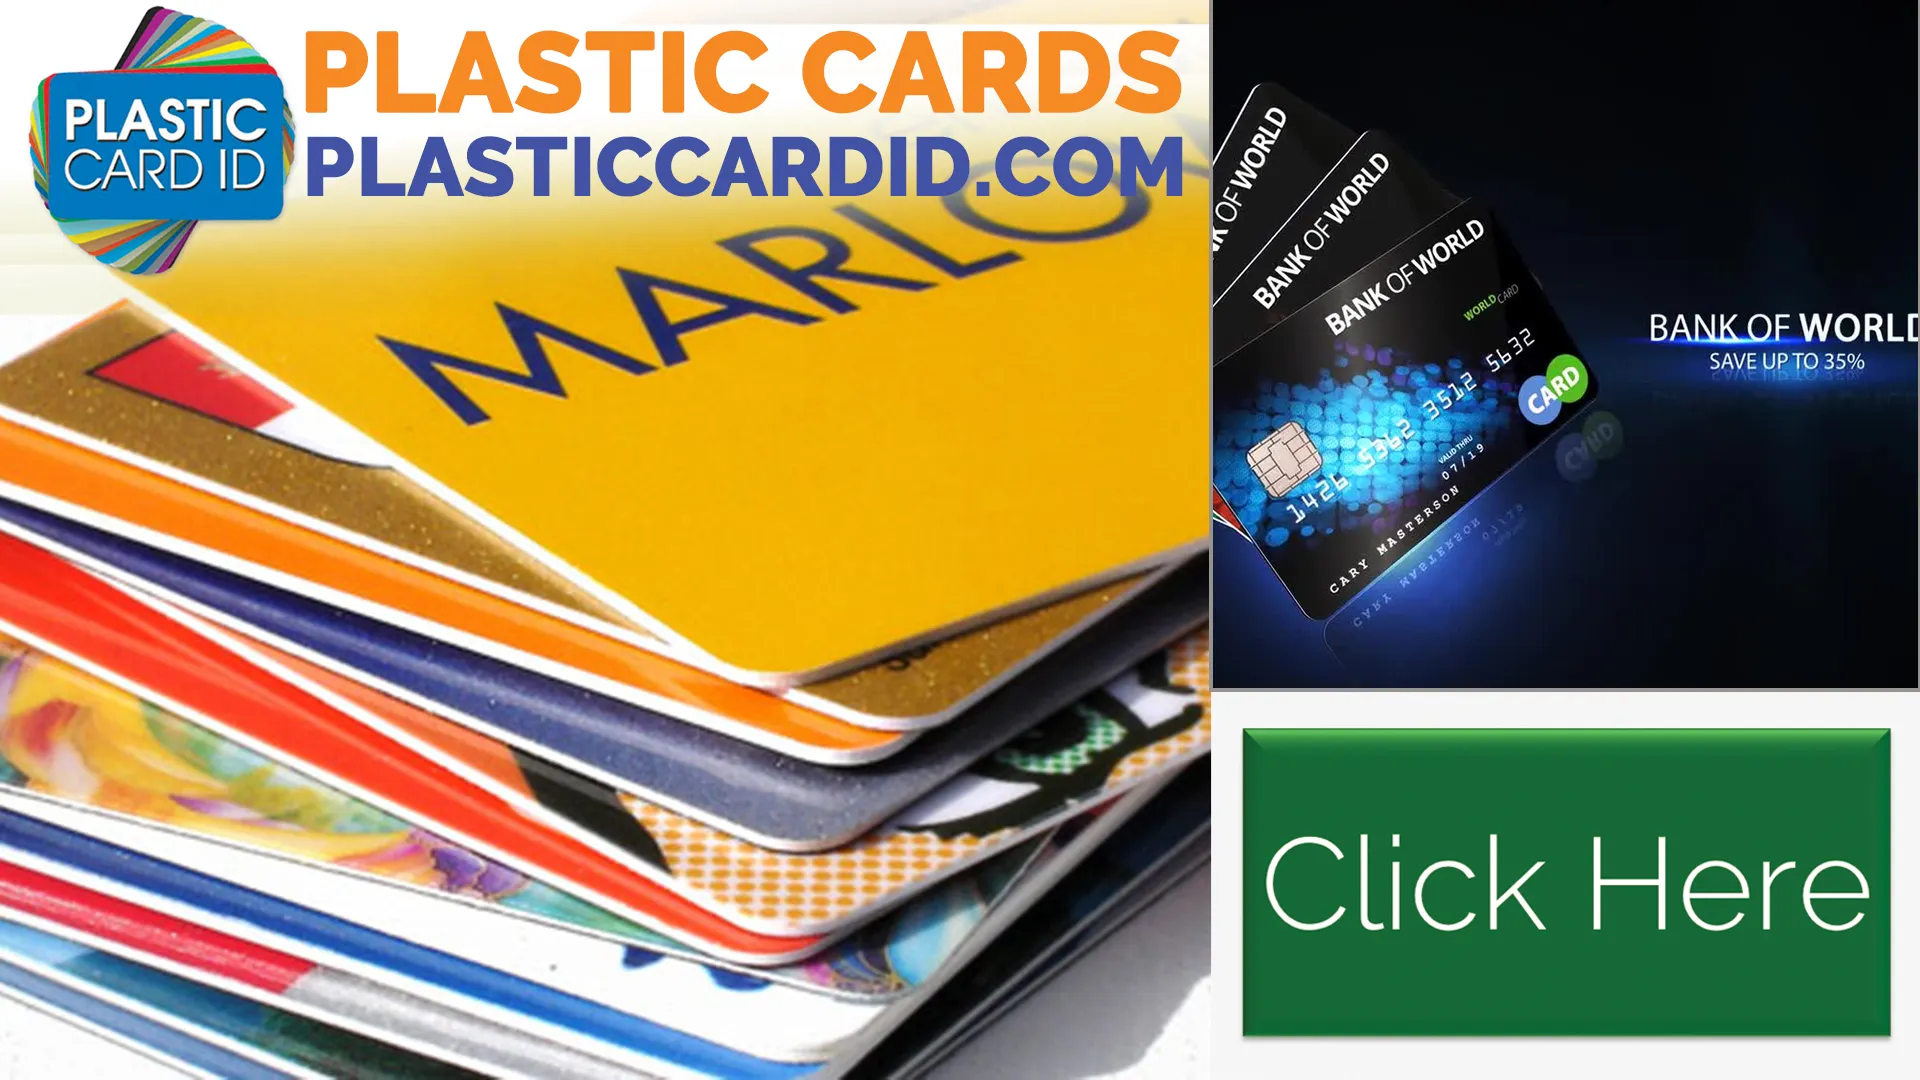 Your One-Stop Shop for Plastic Cards and Printers